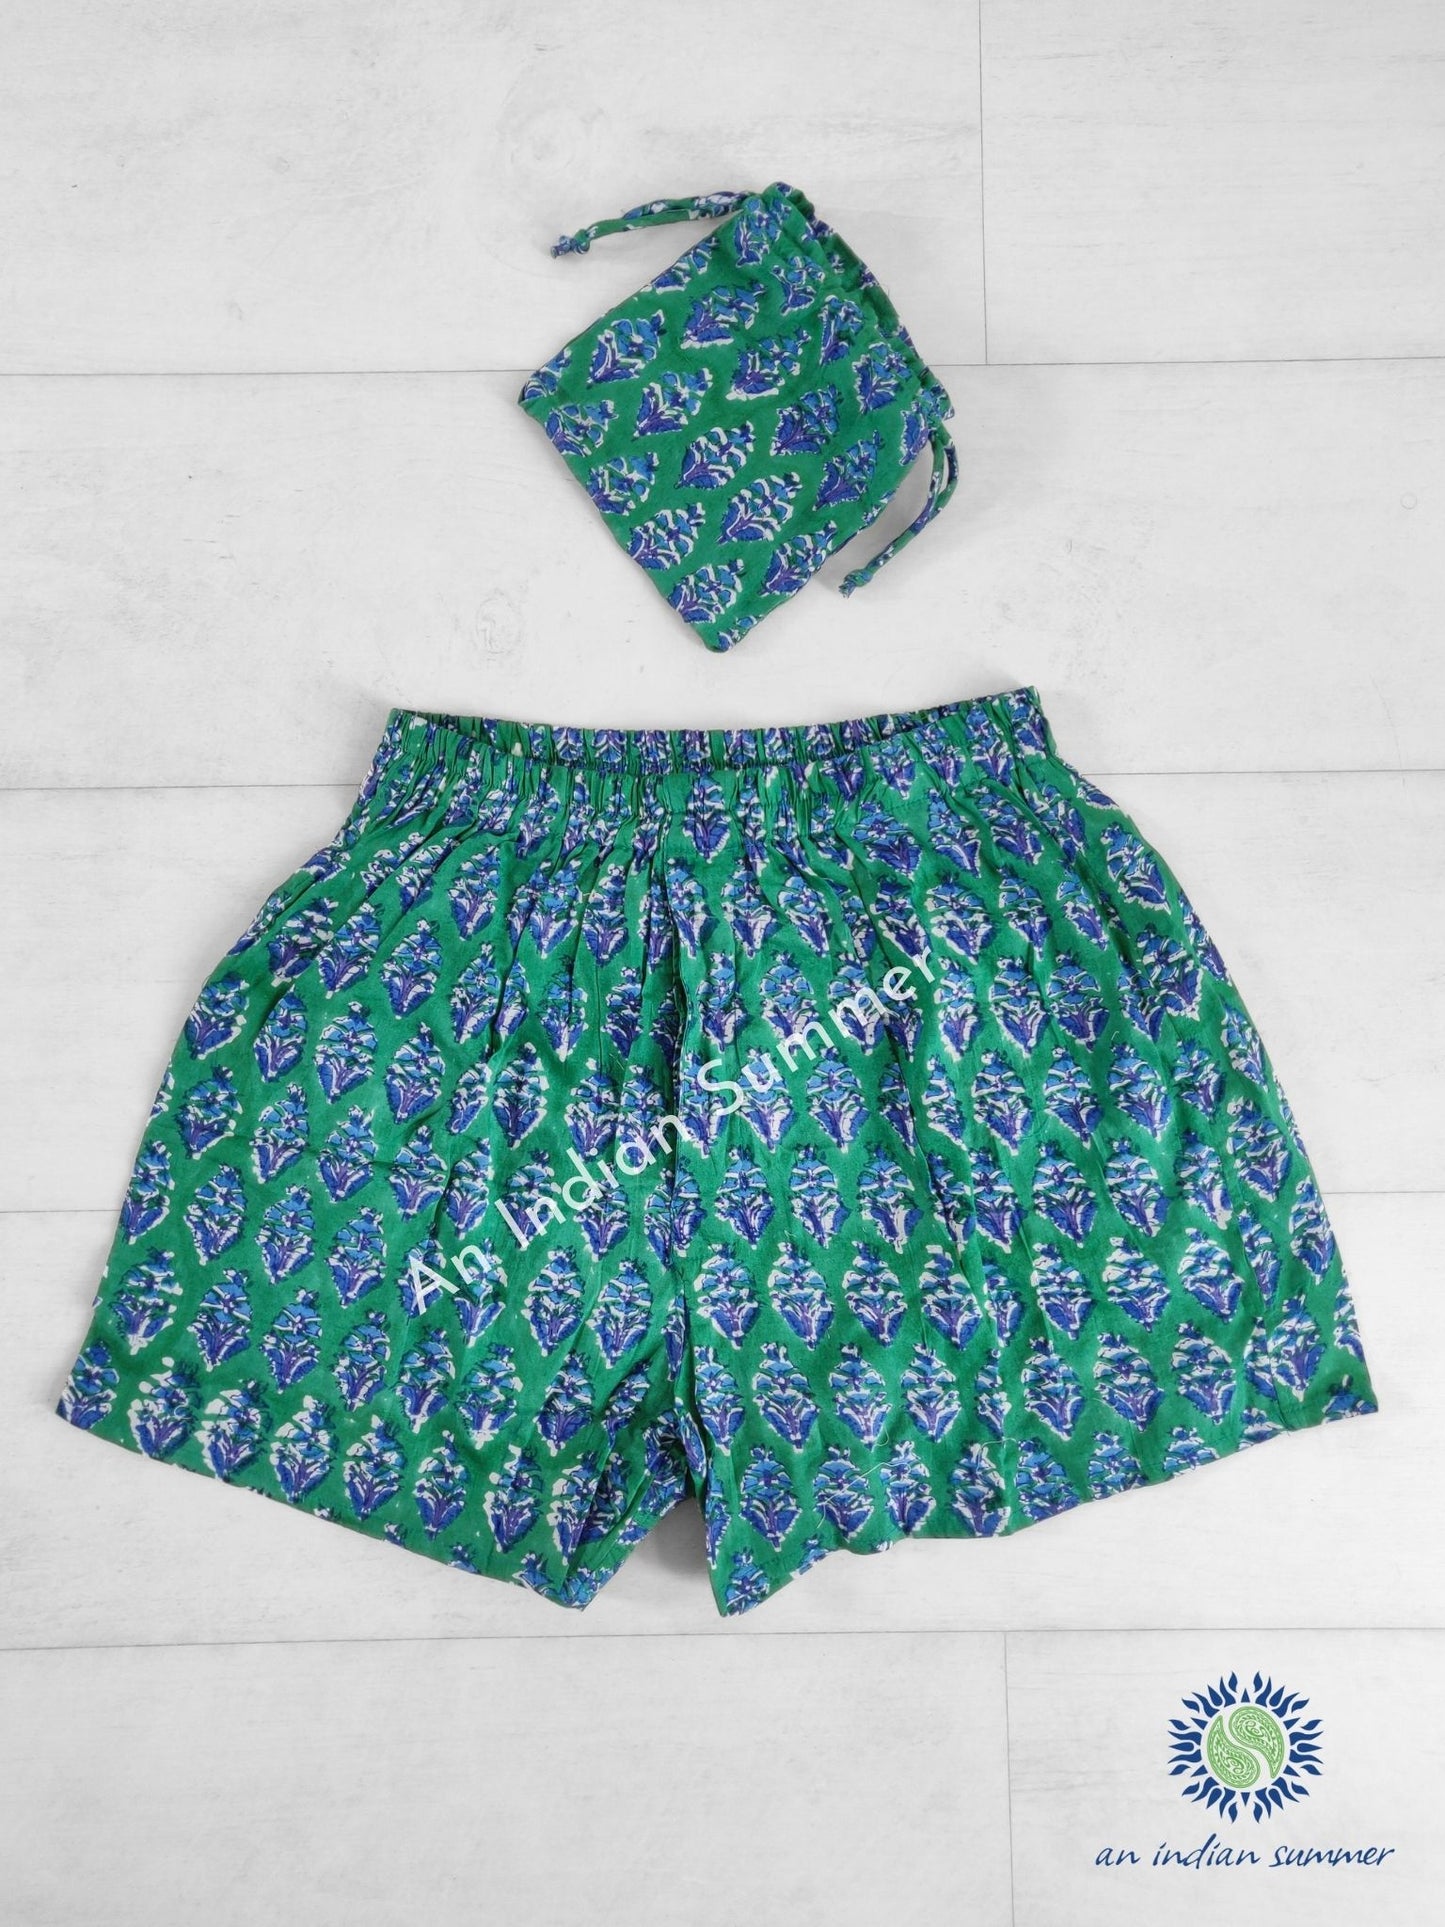 Boxer Shorts | Jasmine | Green & Blue | Unisex | Wood Block Print | Hand Block Printed | Cotton | An Indian Summer | Seasonless Timeless Sustainable Ethical Authentic Artisan Conscious Clothing Lifestyle Brand